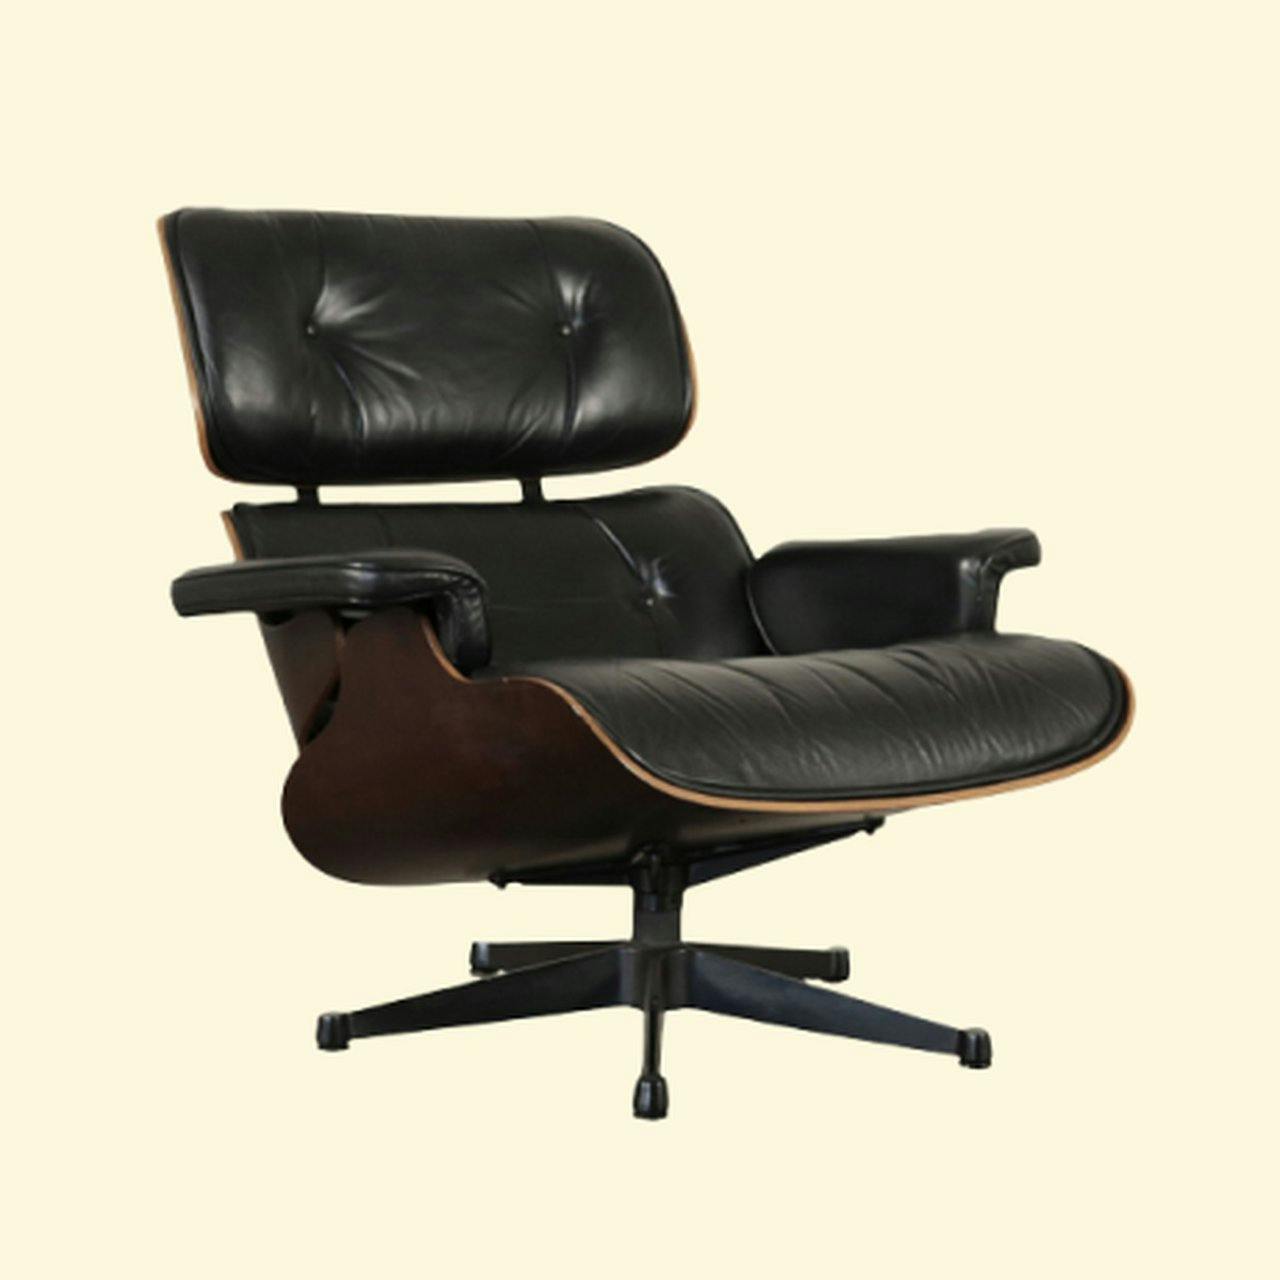 Peter Lvig Chairs and lounge chairs